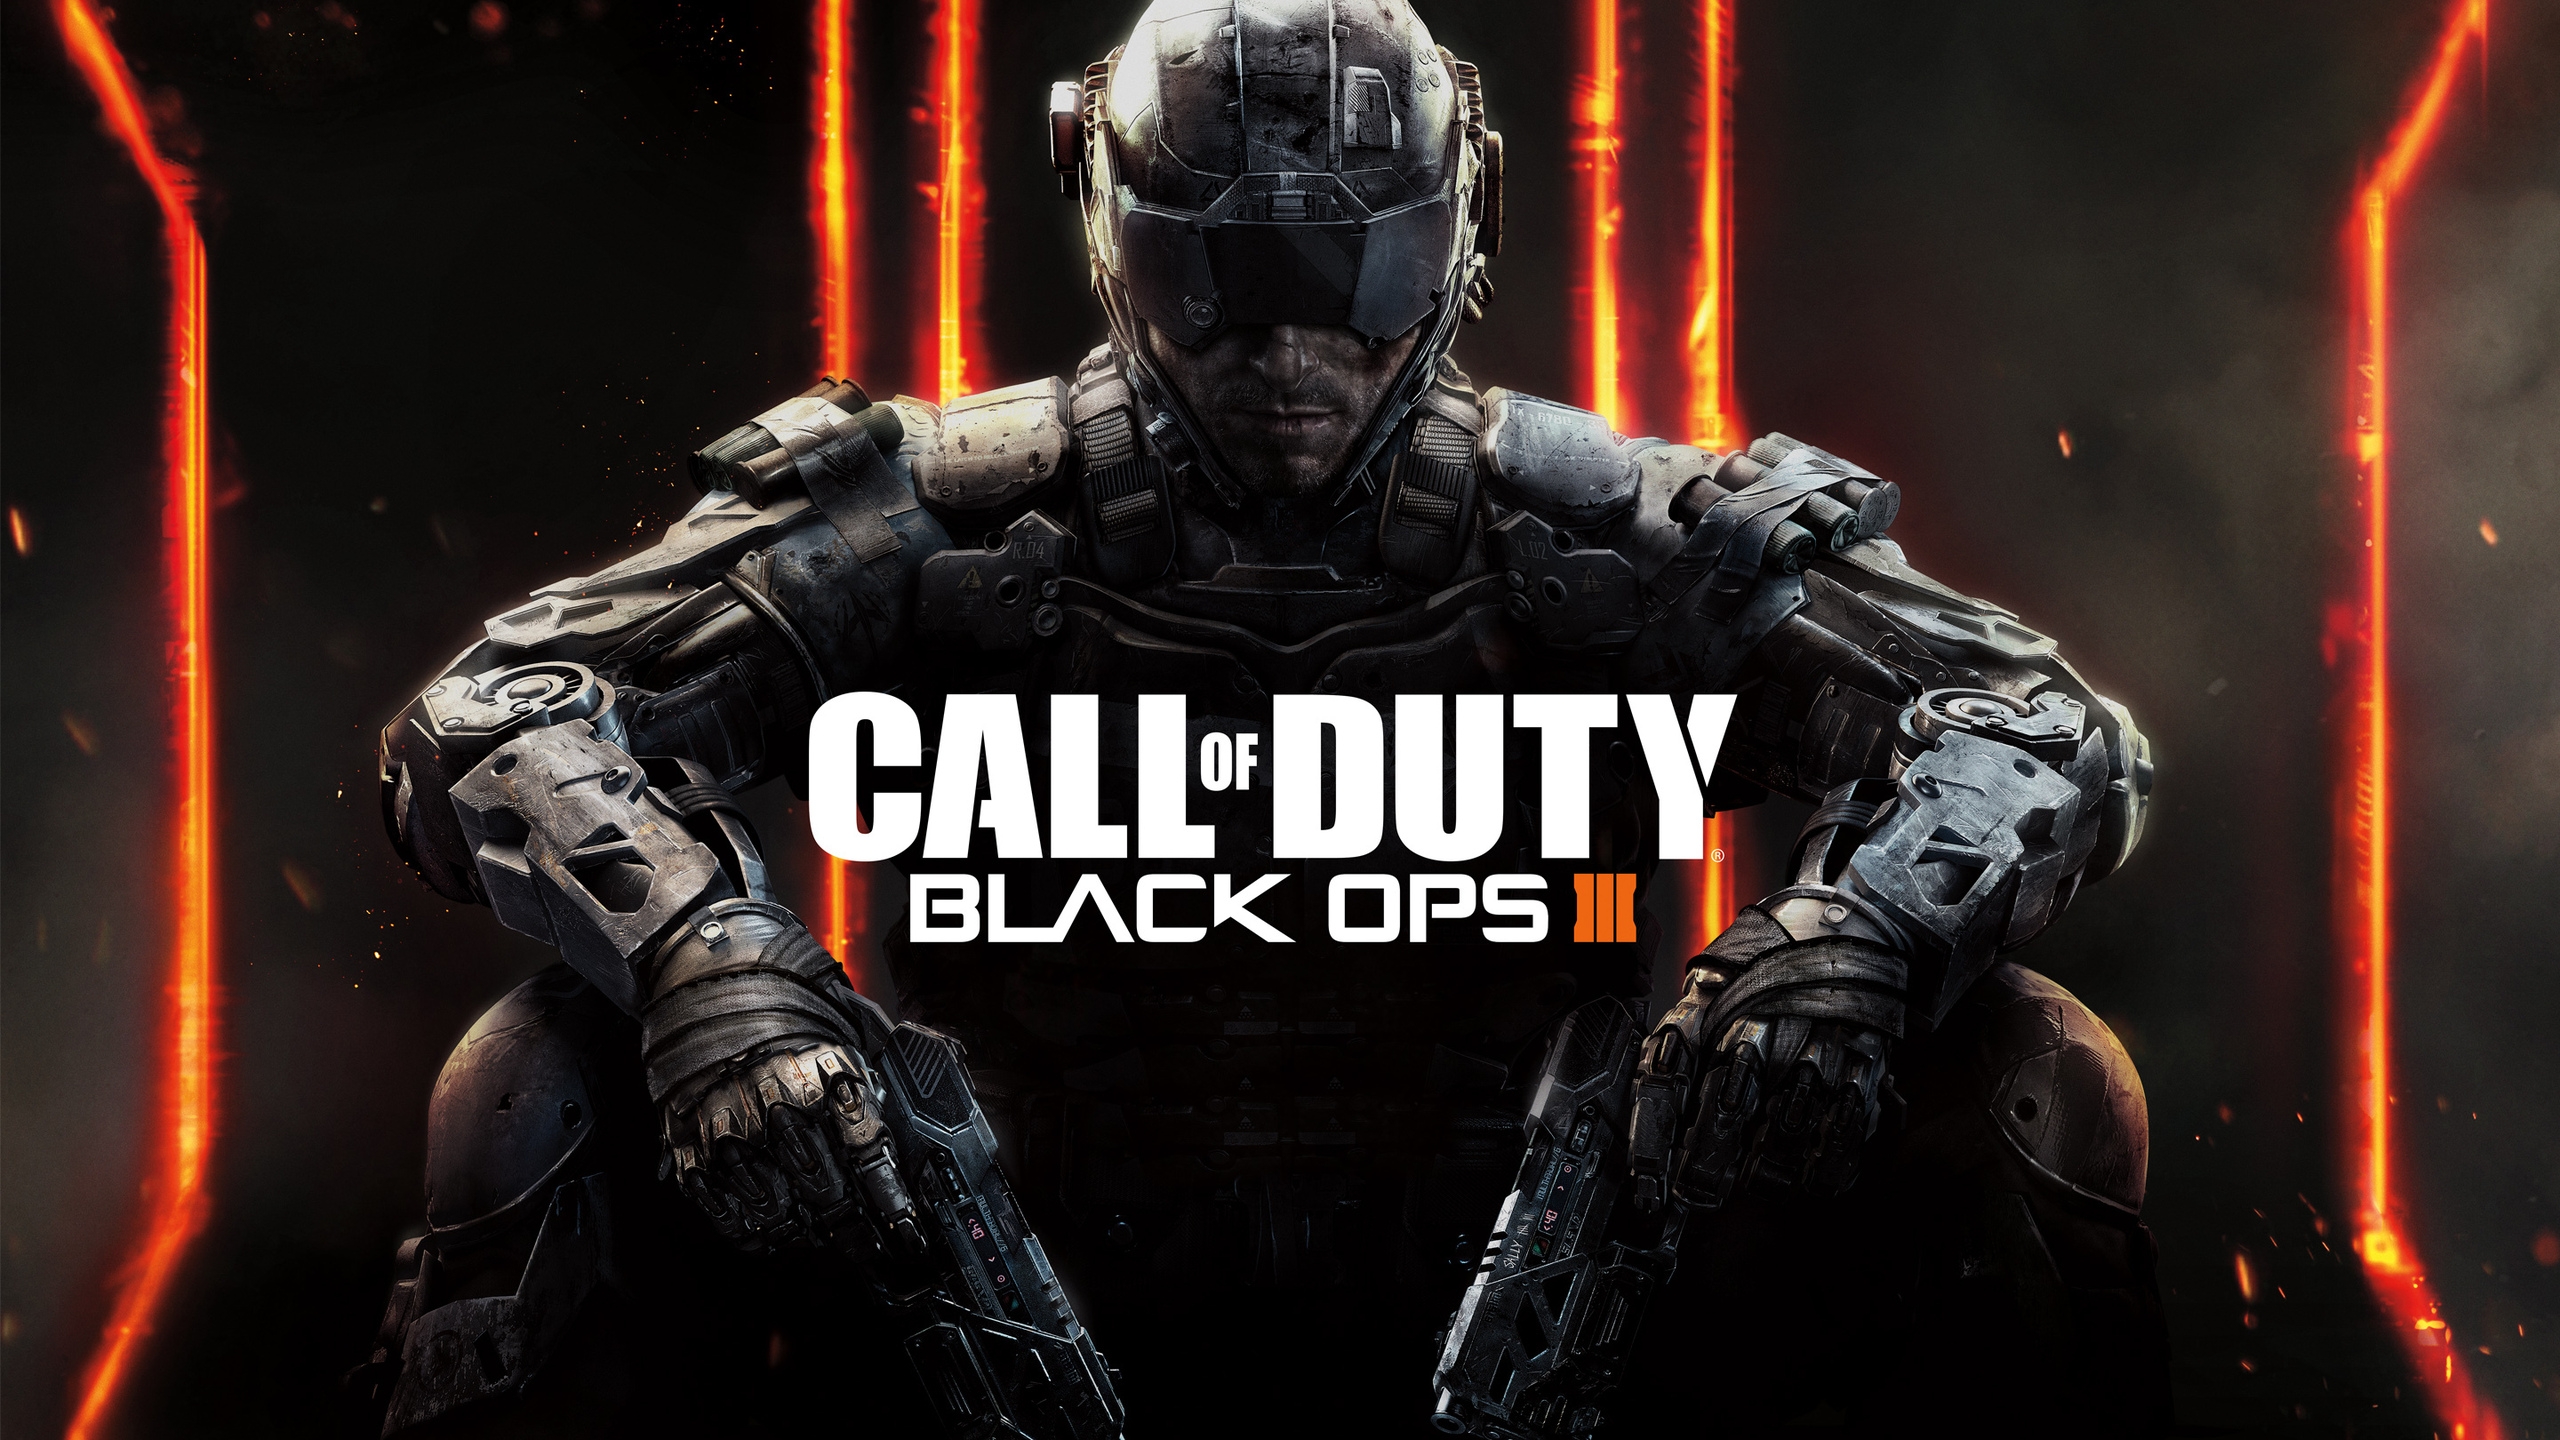 Call of Duty Black Ops 3 Poster for 2560x1440 HDTV resolution